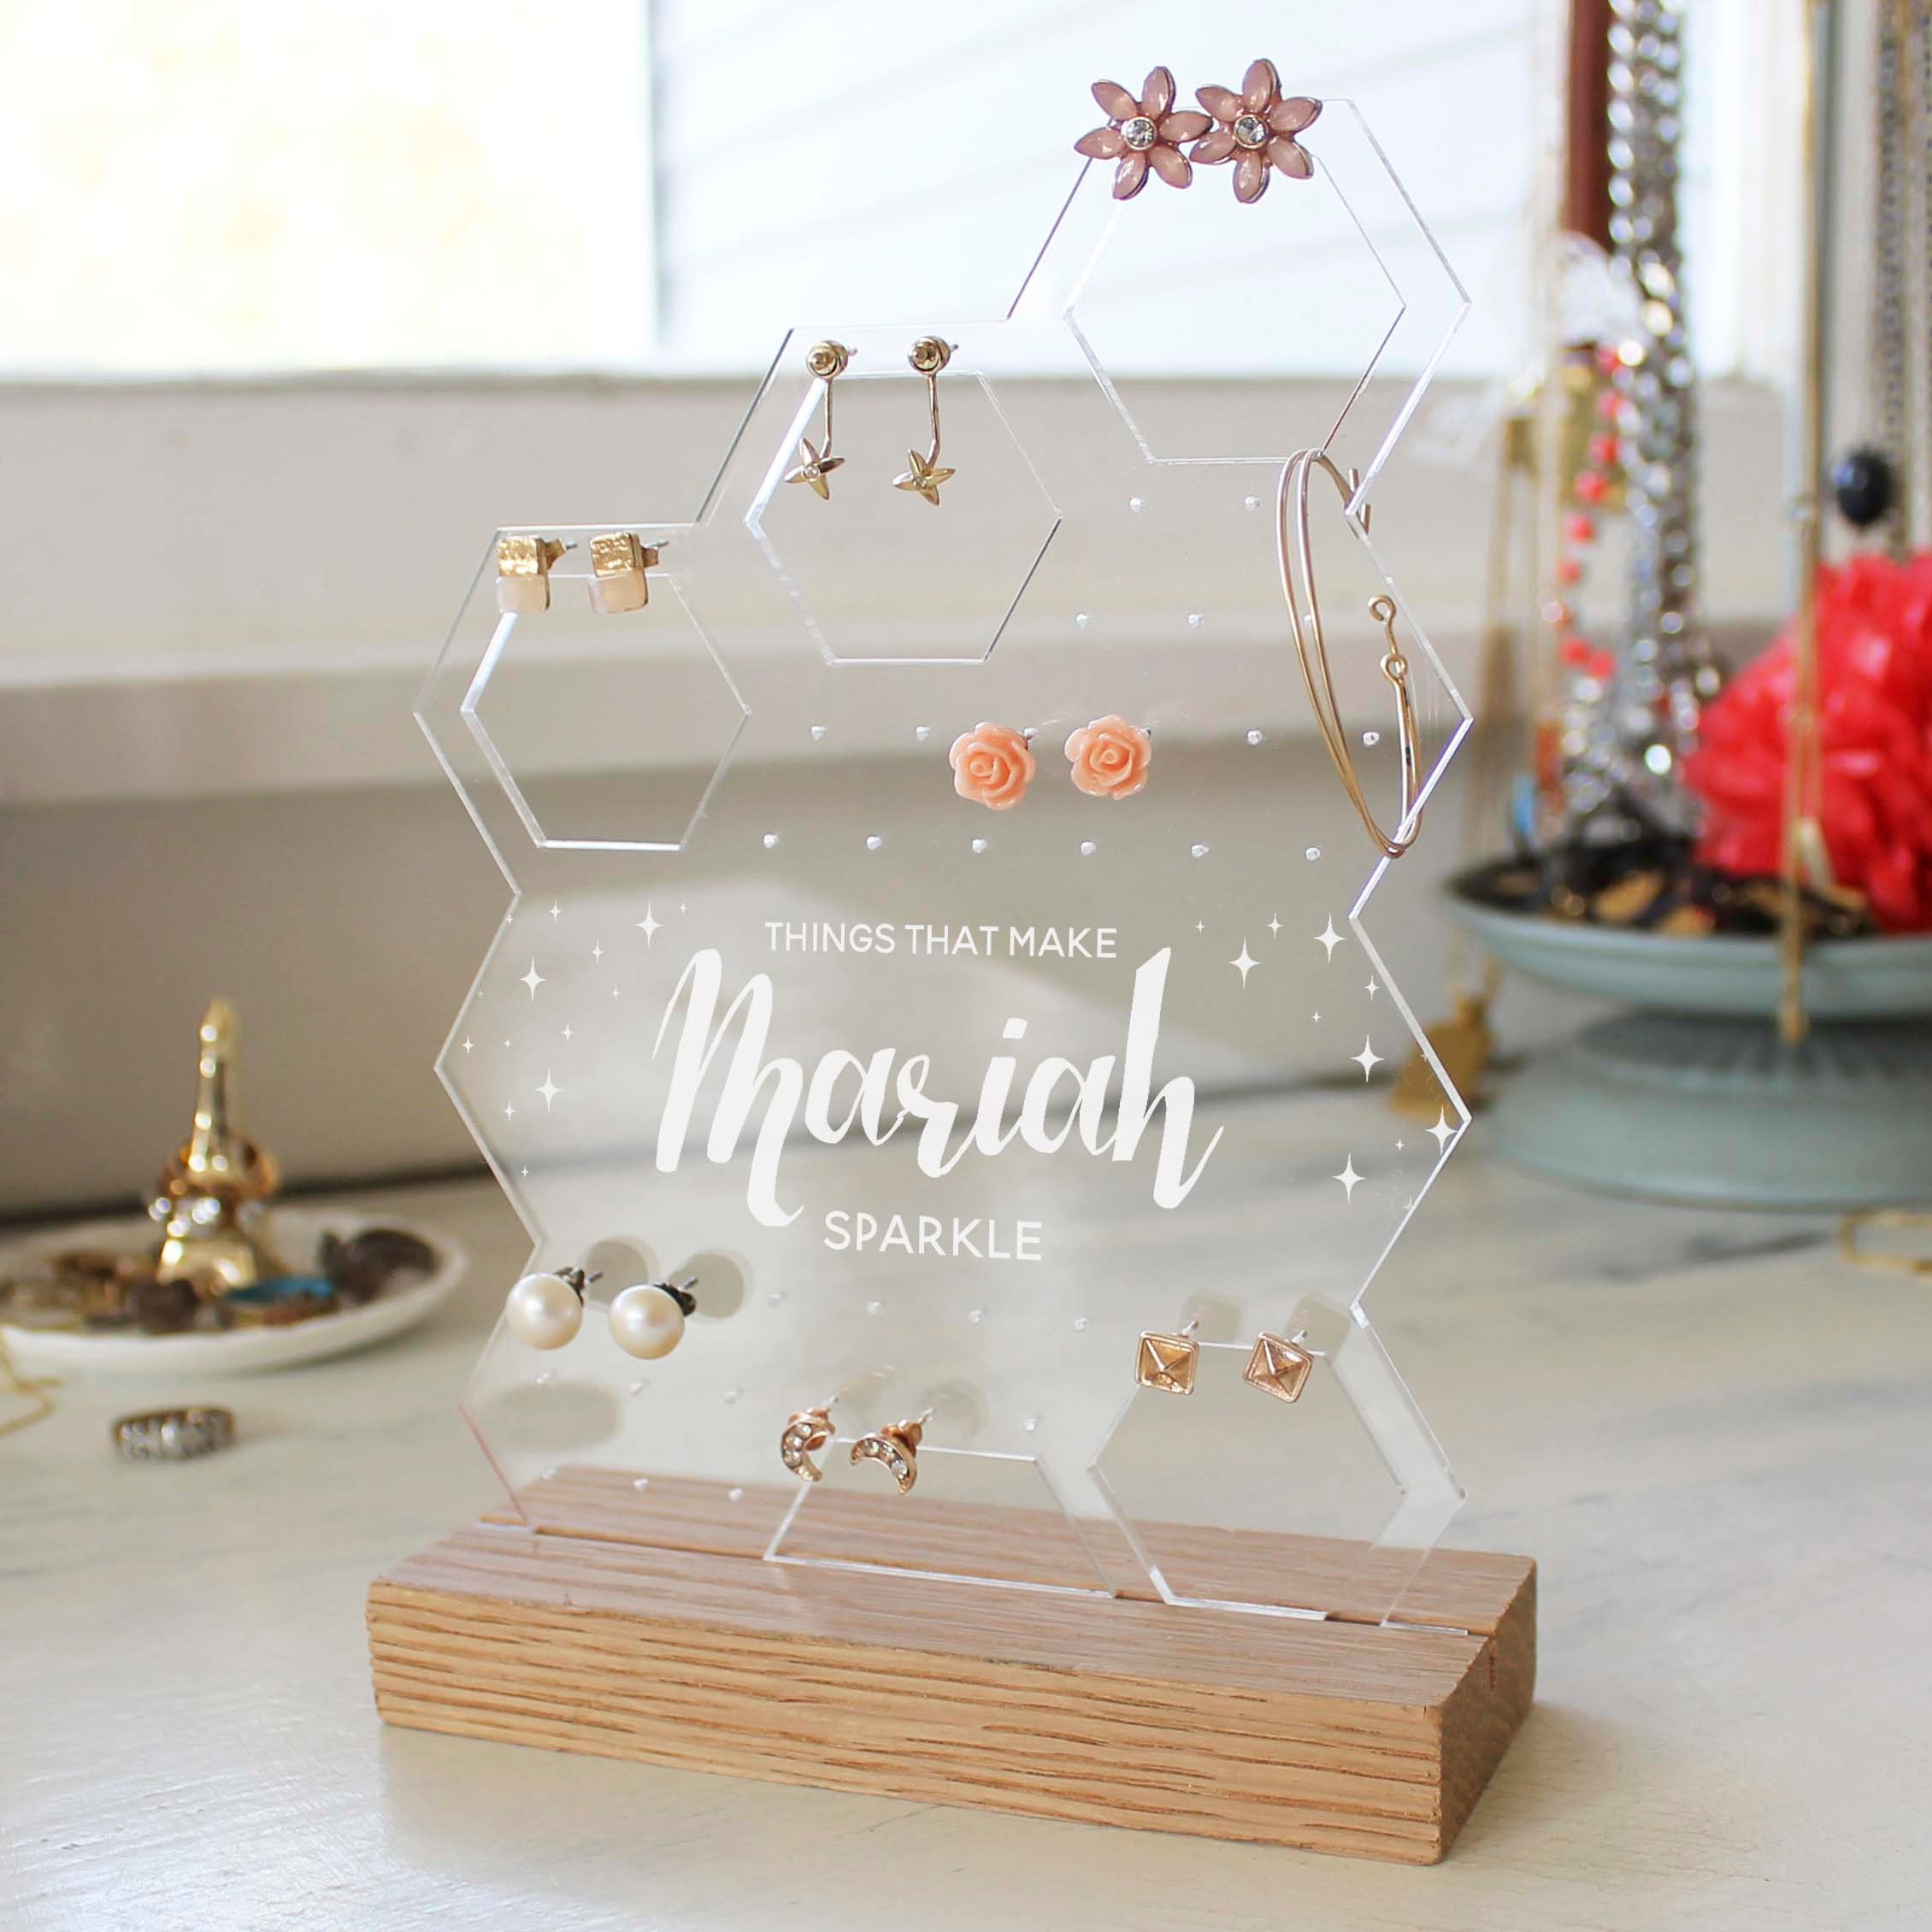  GemeShou 2pcs Acrylic earring display stands for selling, Clear  earring holder organizer, transparent L bar earring hangers mini  stand【Clear Acrylic Earring L Stand-2pcs 】 : Clothing, Shoes & Jewelry